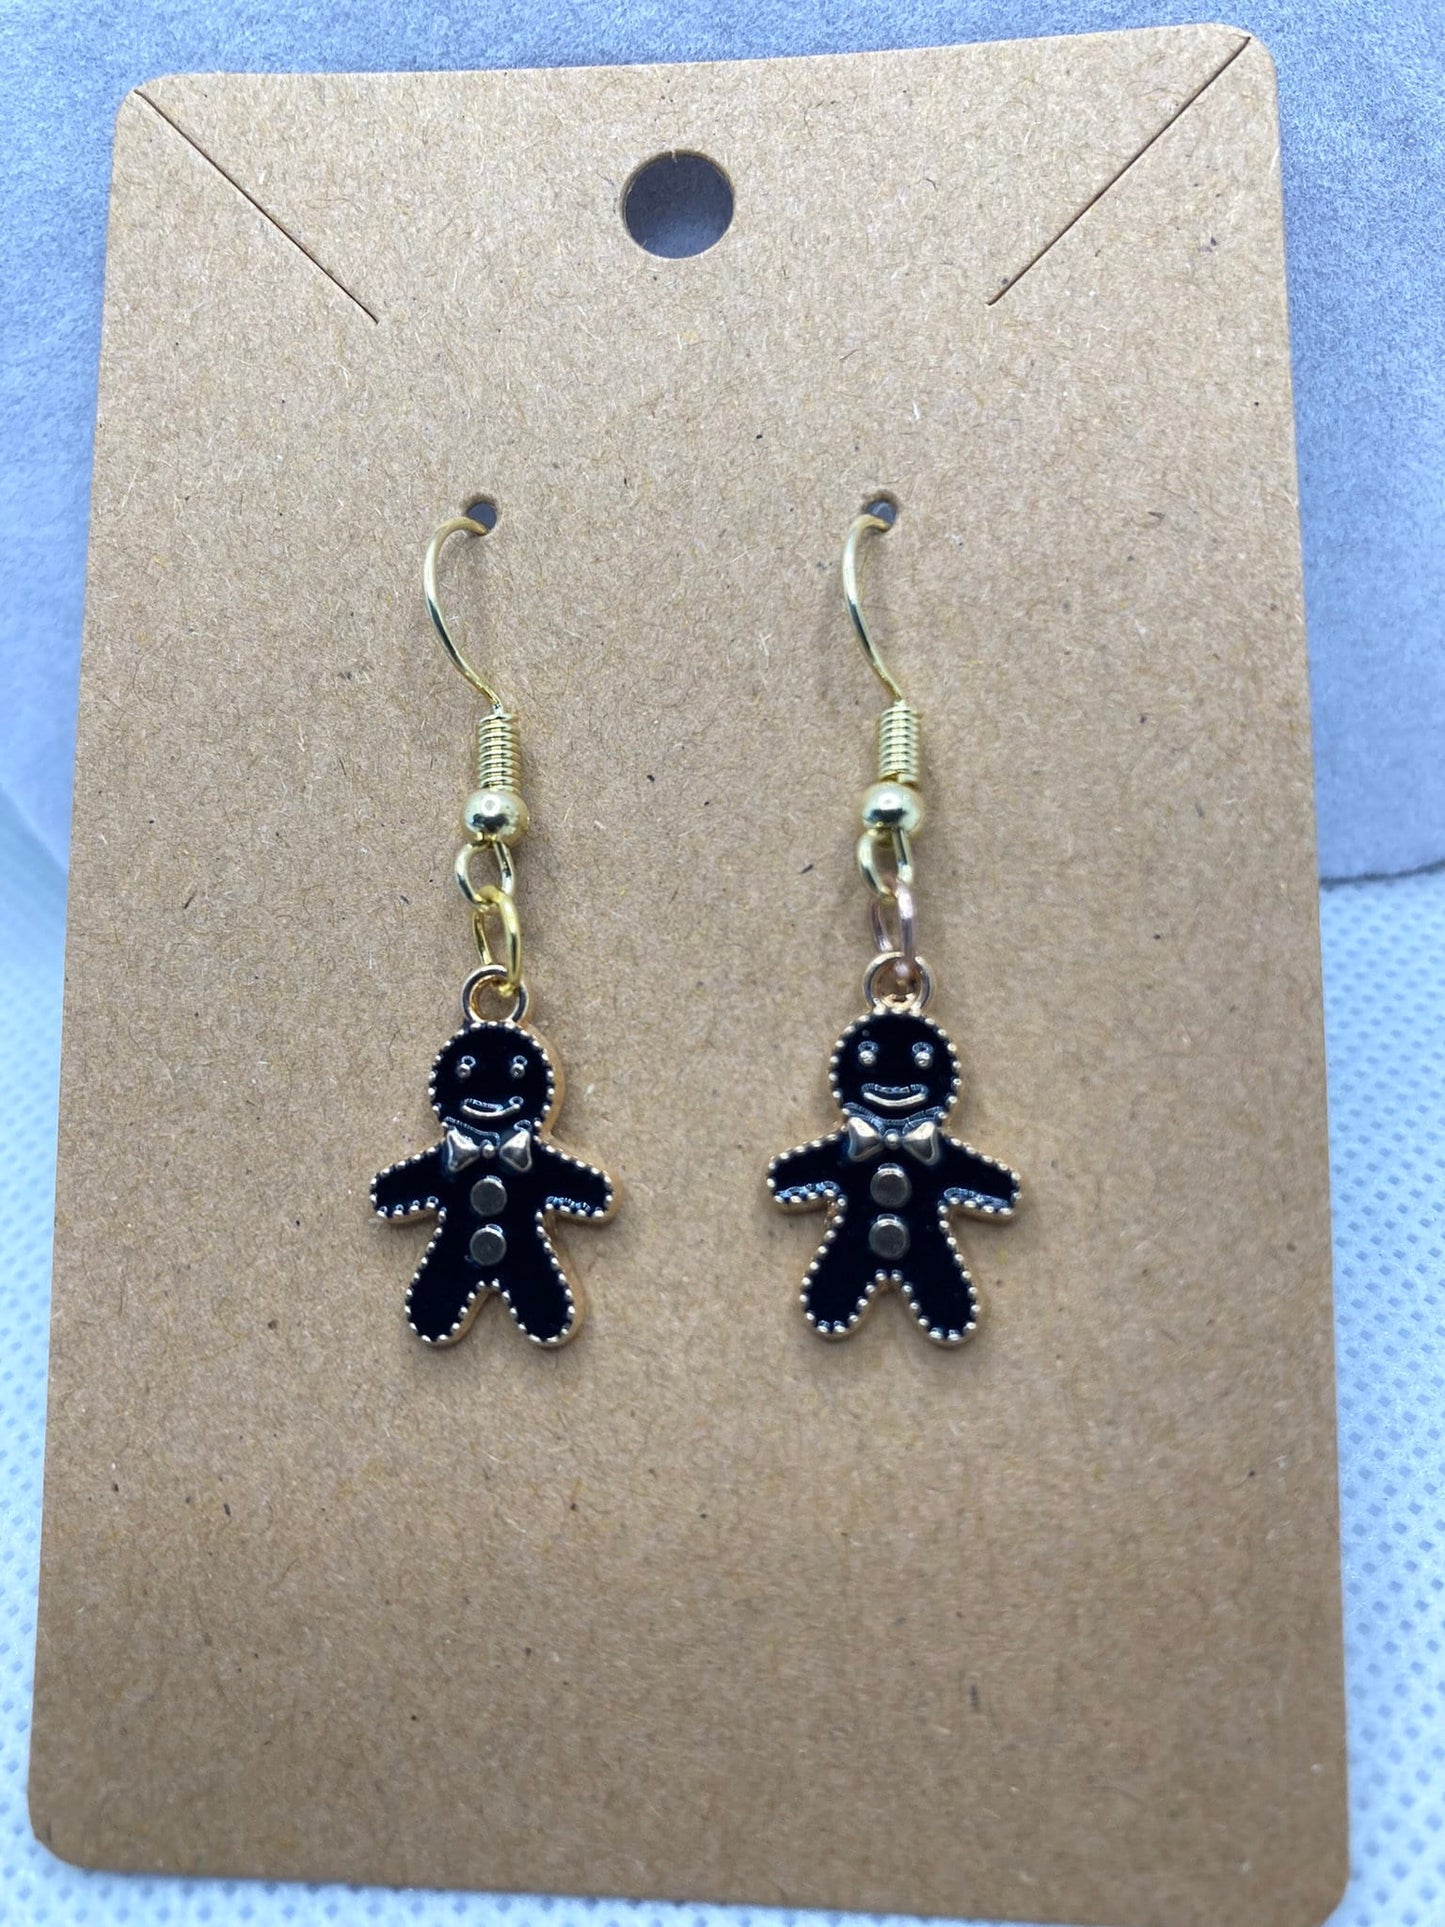 Christmas Earrings with Christmas Black Gingerbread Man Charms are perfect for the Holidays and gift-giving.